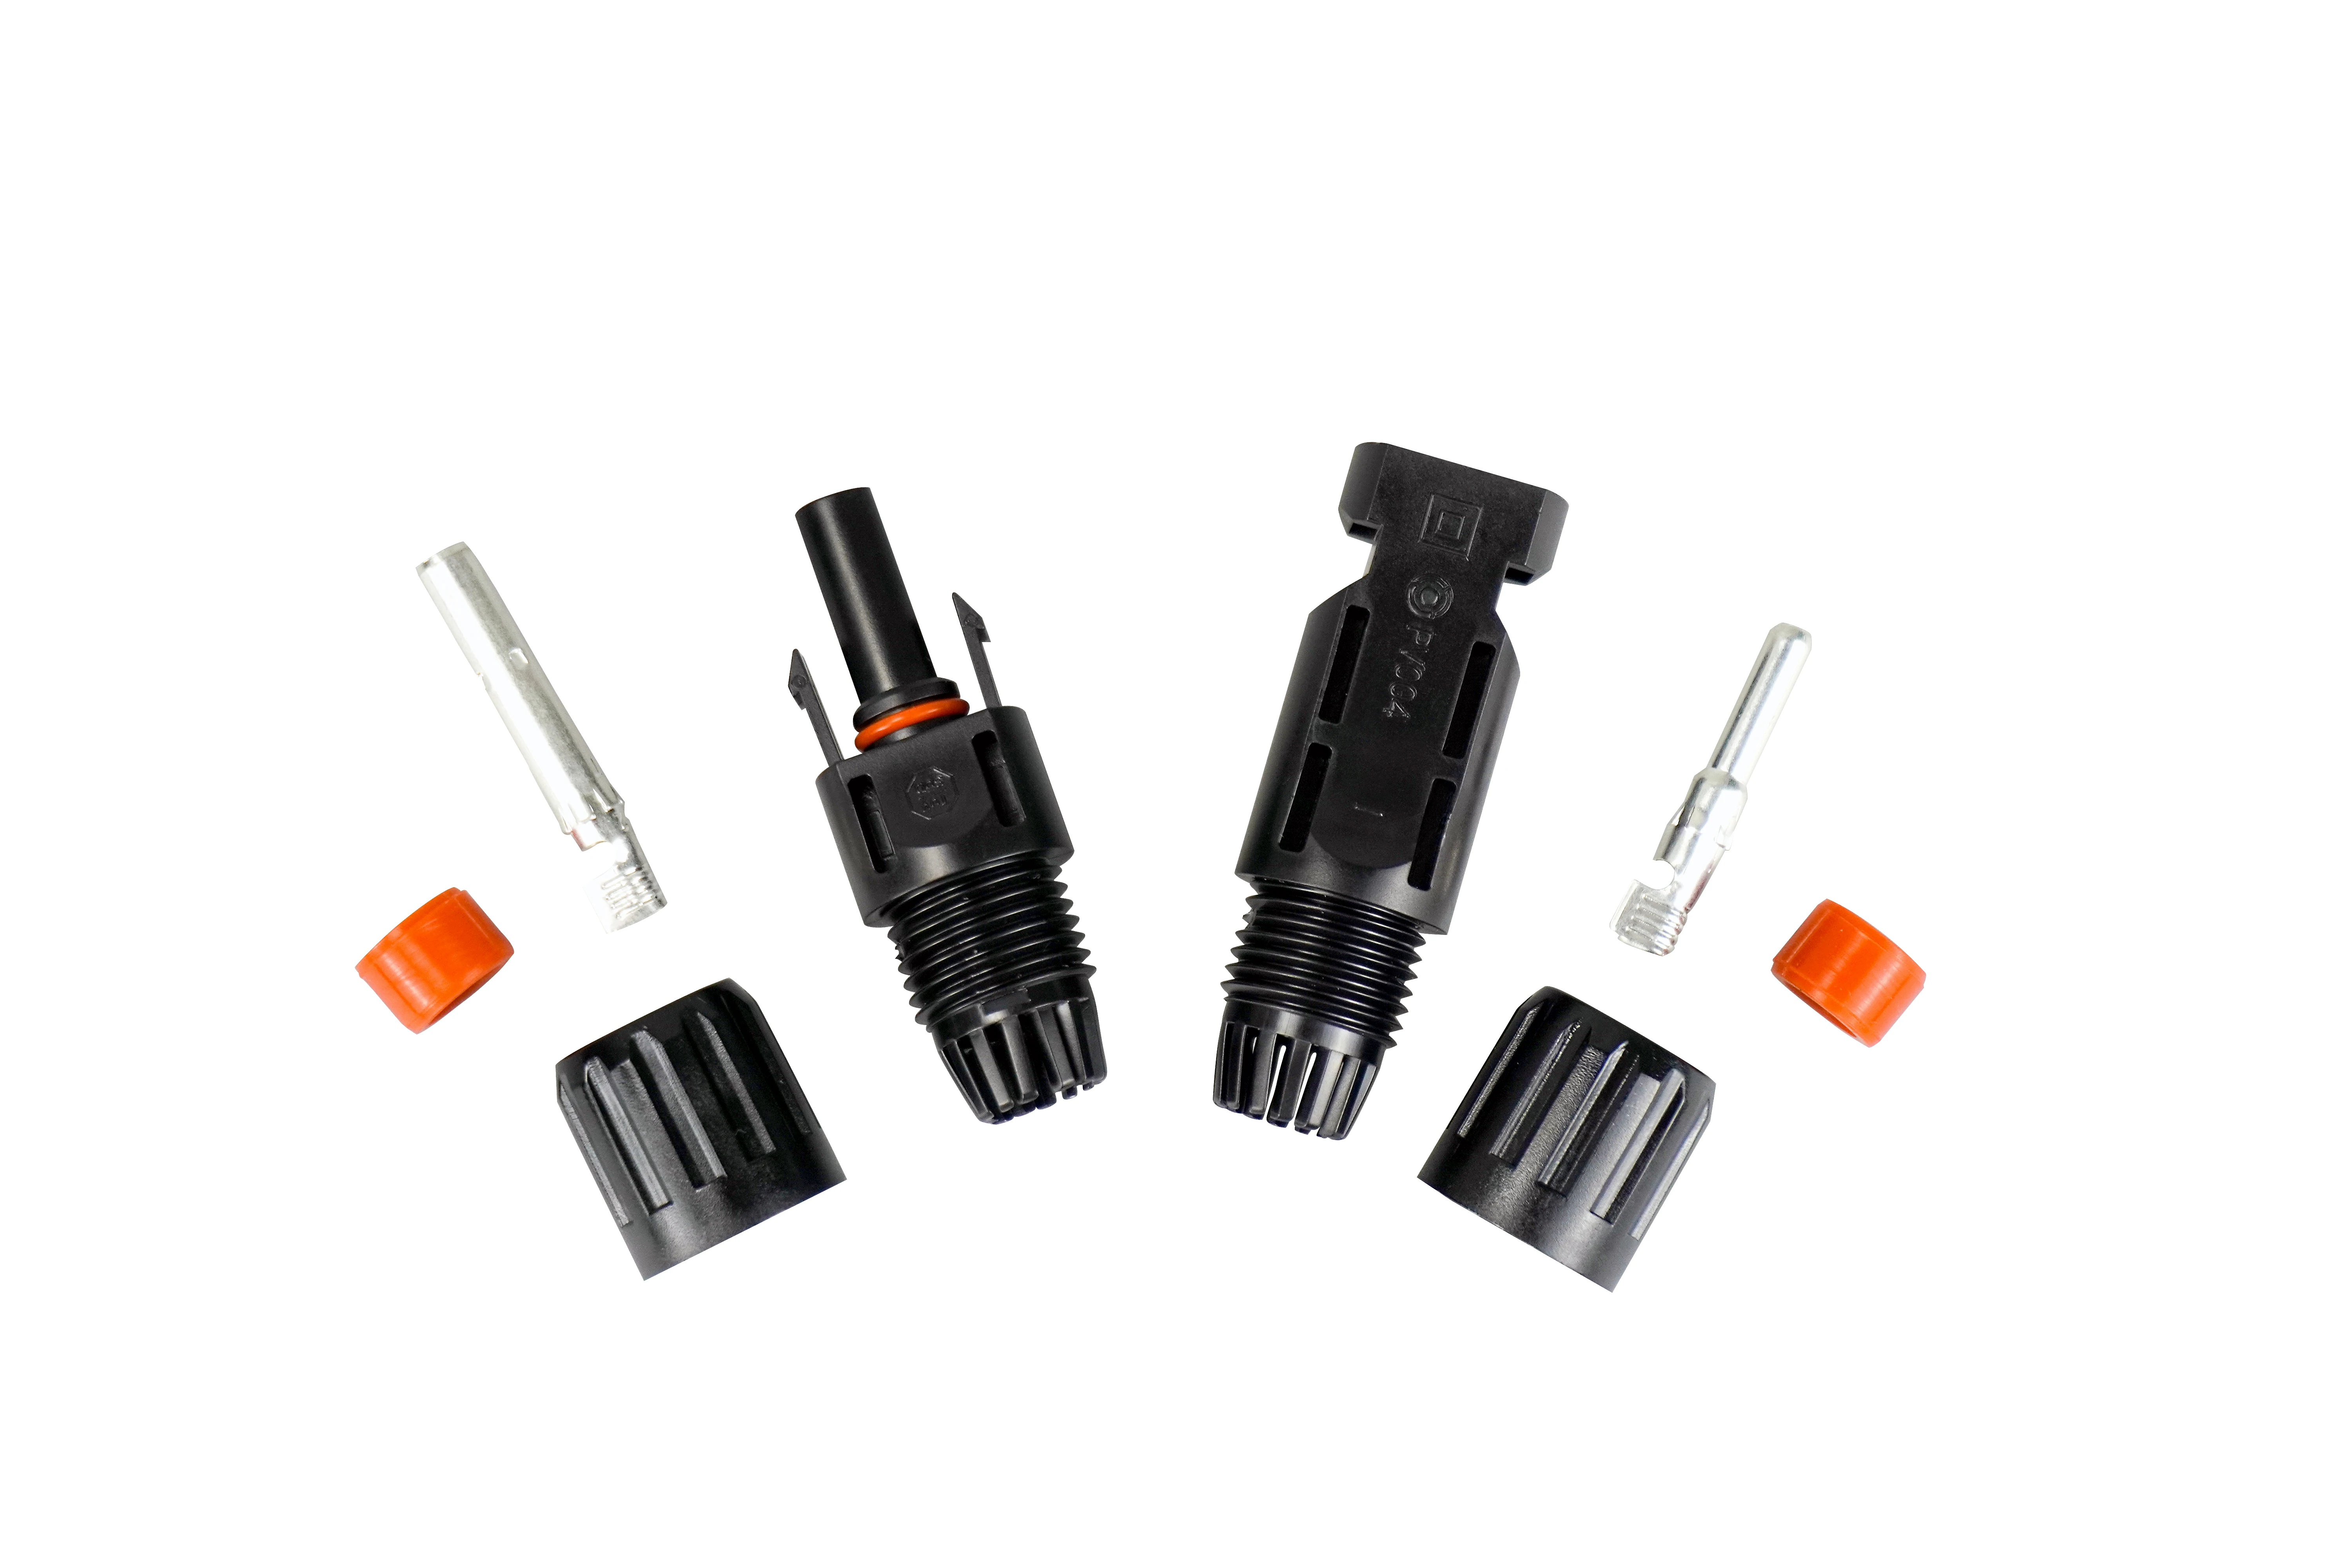 TUV 2 pin PV Panel Connector MC 4 mm Female And Male Coupler T4 PV004-EN solar Connector For Solar Inverter